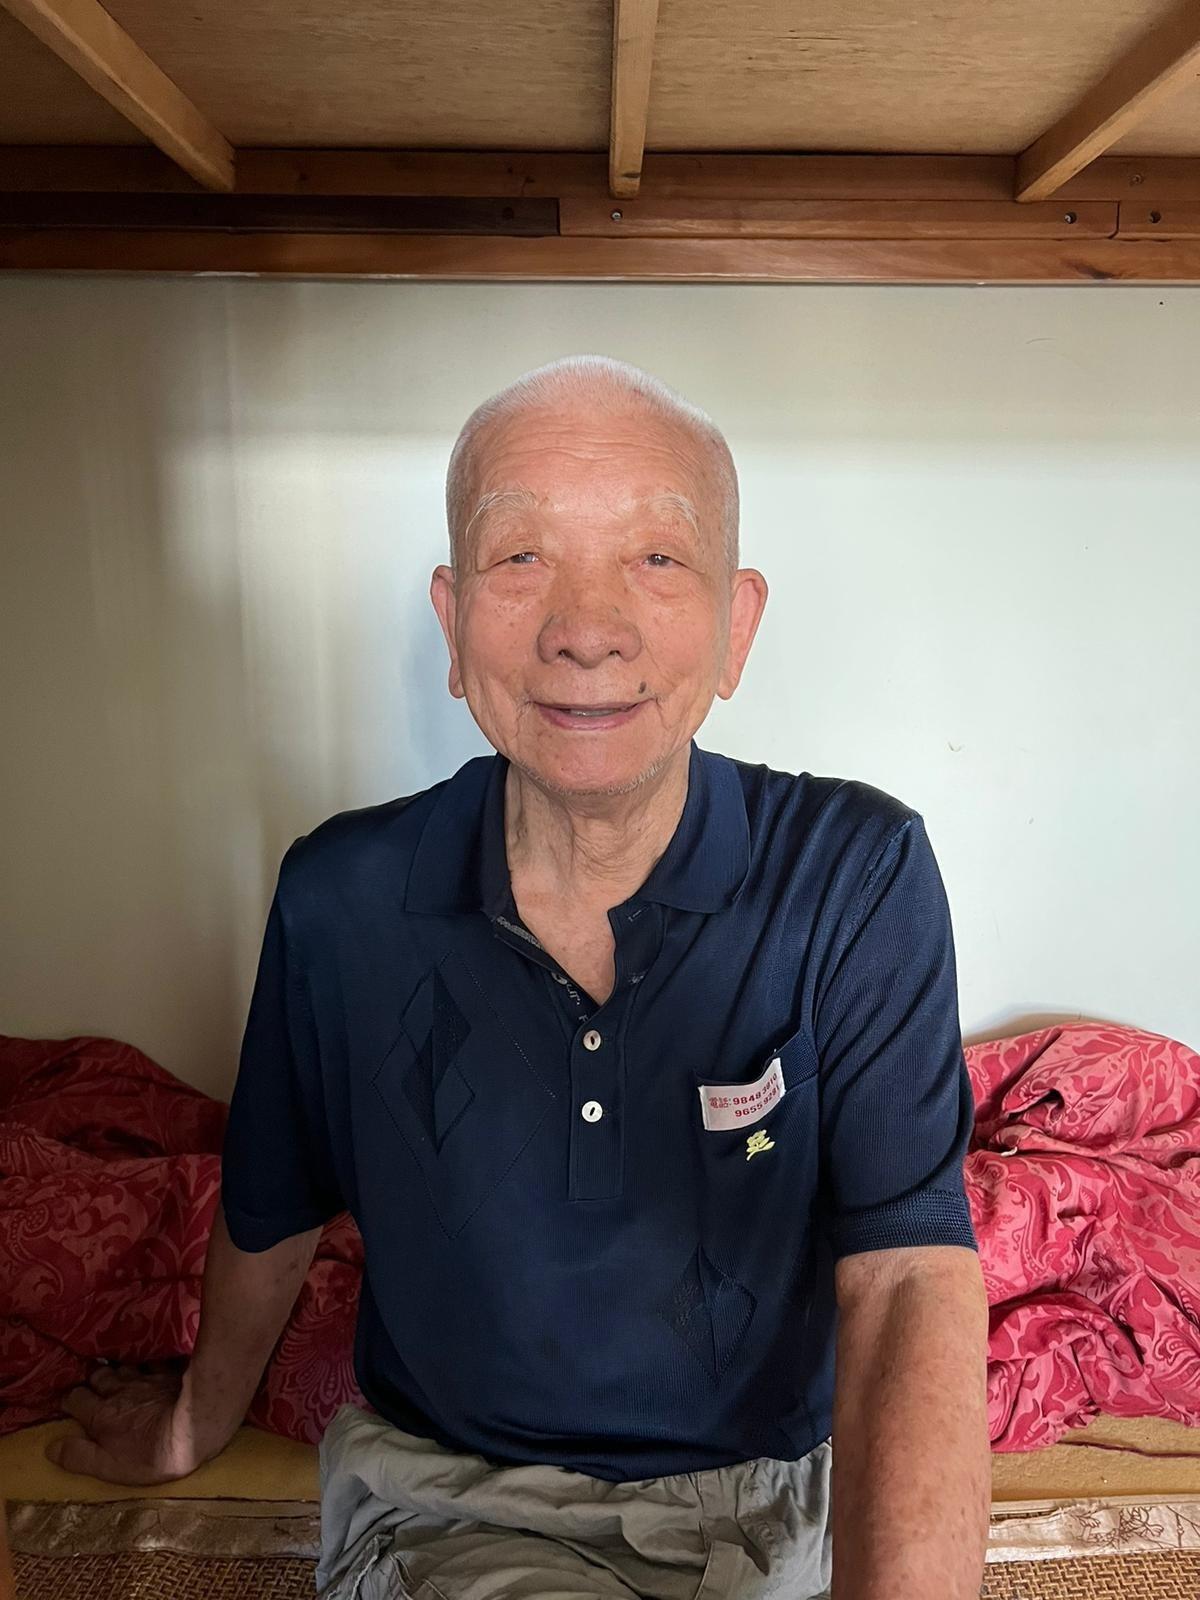 Fok Sze-ying, aged 99, is about 1.6 metres tall, 63 kilograms in weight and of thin build. He has a round face with yellow complexion and short grey and white hair. He was last seen wearing a dark red jacket, dark-coloured trousers and dark-coloured shoes and carrying a grey and blue trolley.